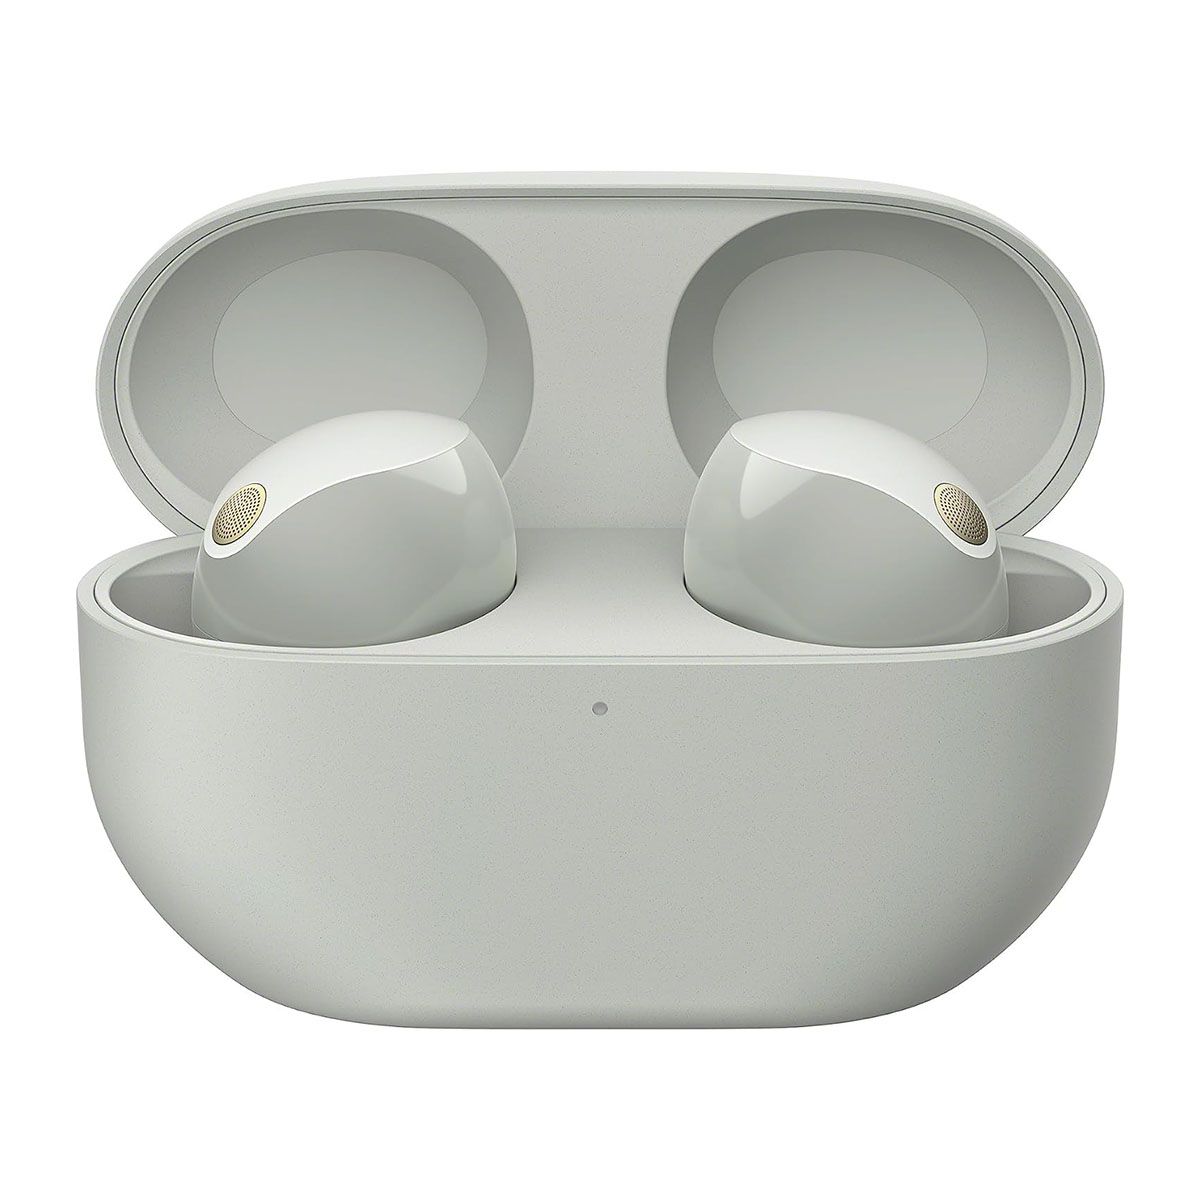 Sony WF-1000XM5 Truly Wireless Noise Canceling Earbuds - silver - view of earbuds in opened case